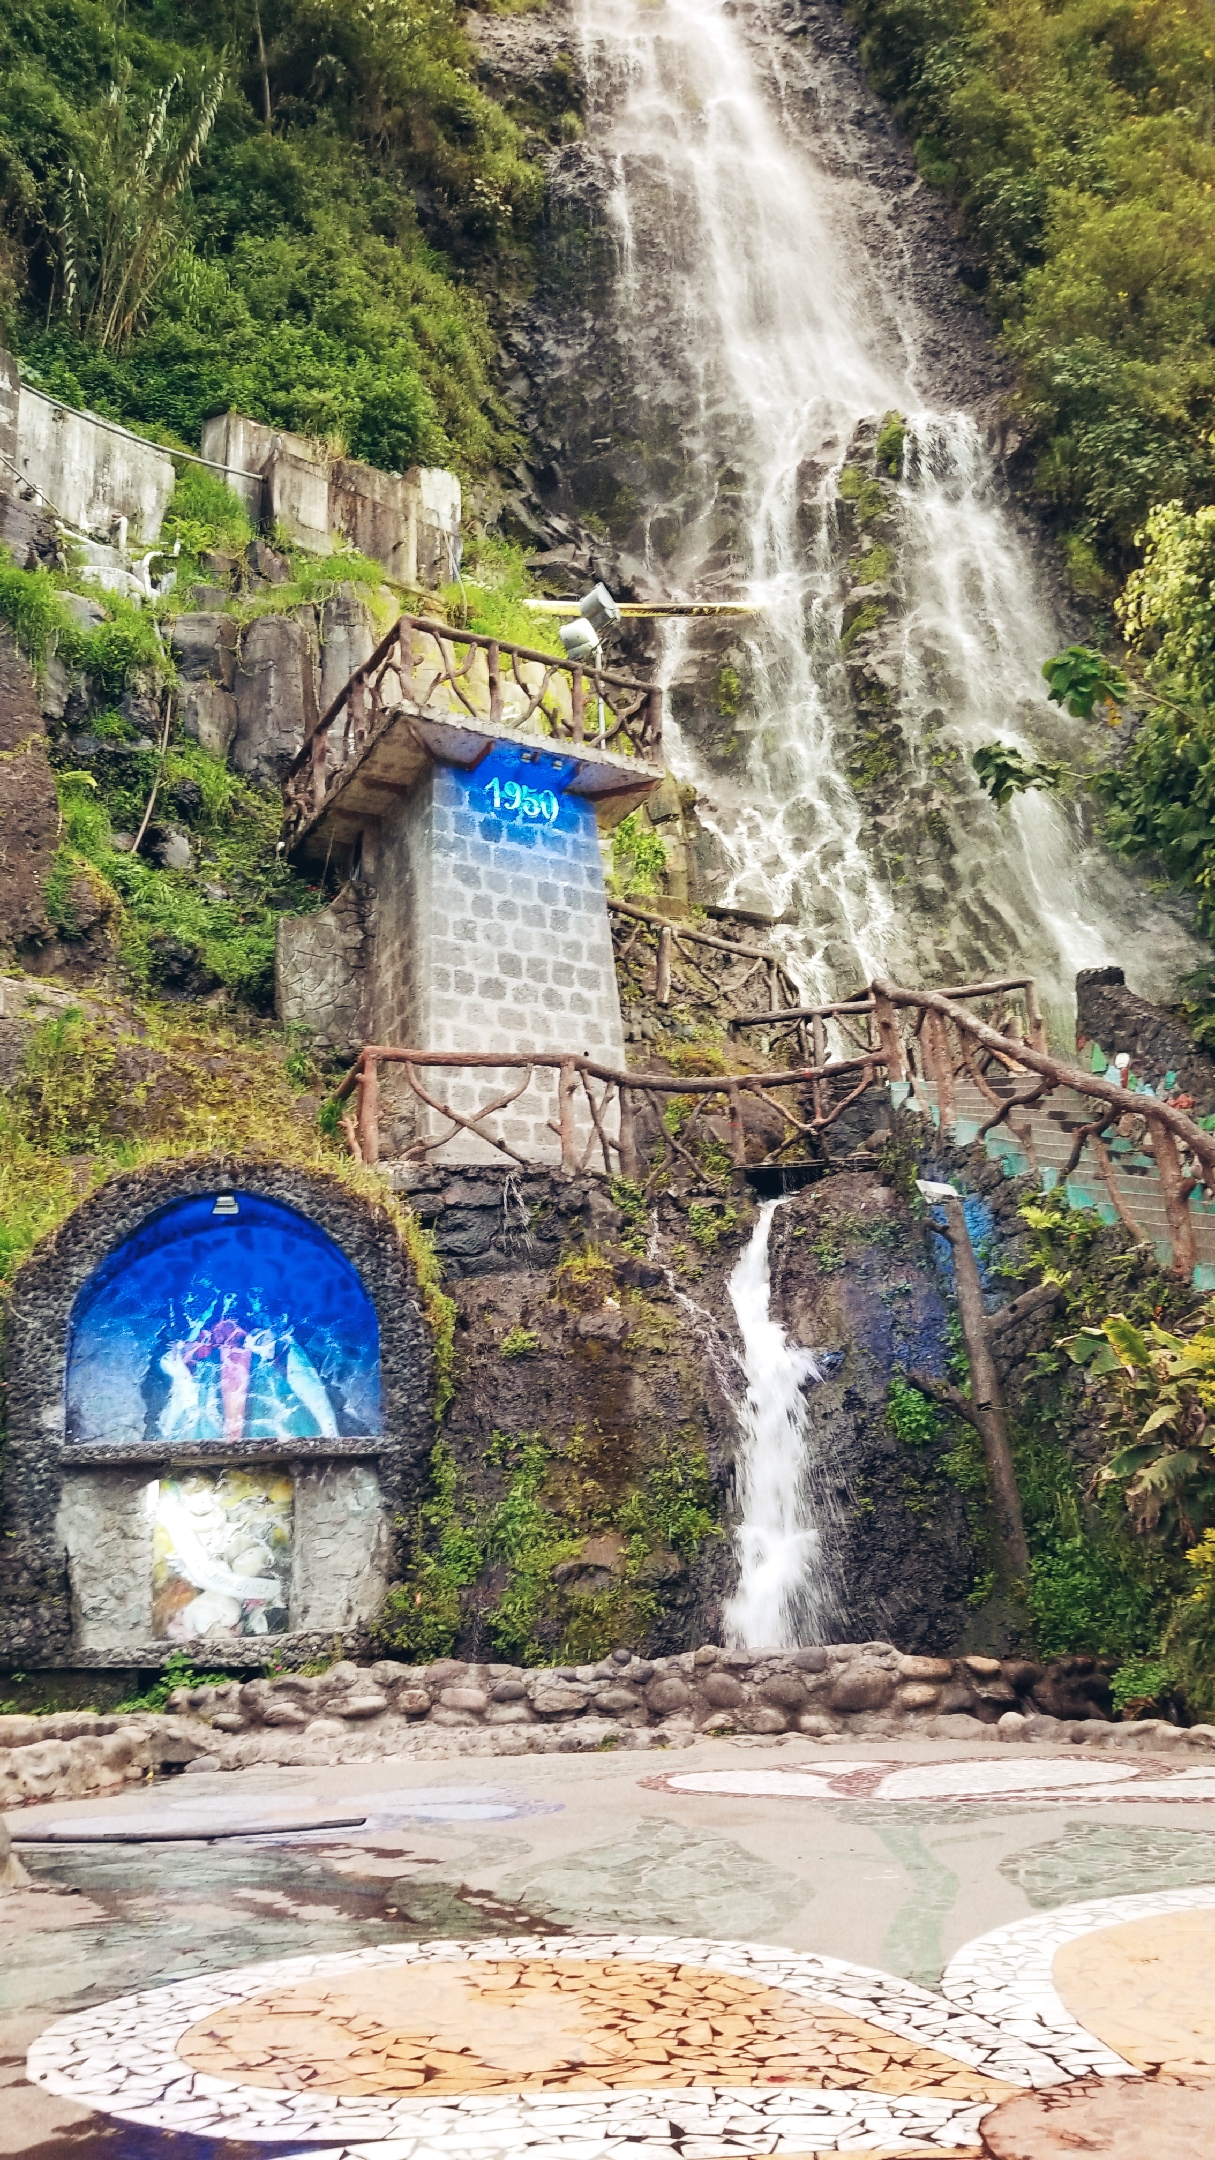 Cascada de la virgen in Baños, Ecuador. Named after Santa Maria, which according to locals, had performed numerous miracles for the town. Perhaps this has something to do with the fact that the city resides safely at the base of an active volcano.